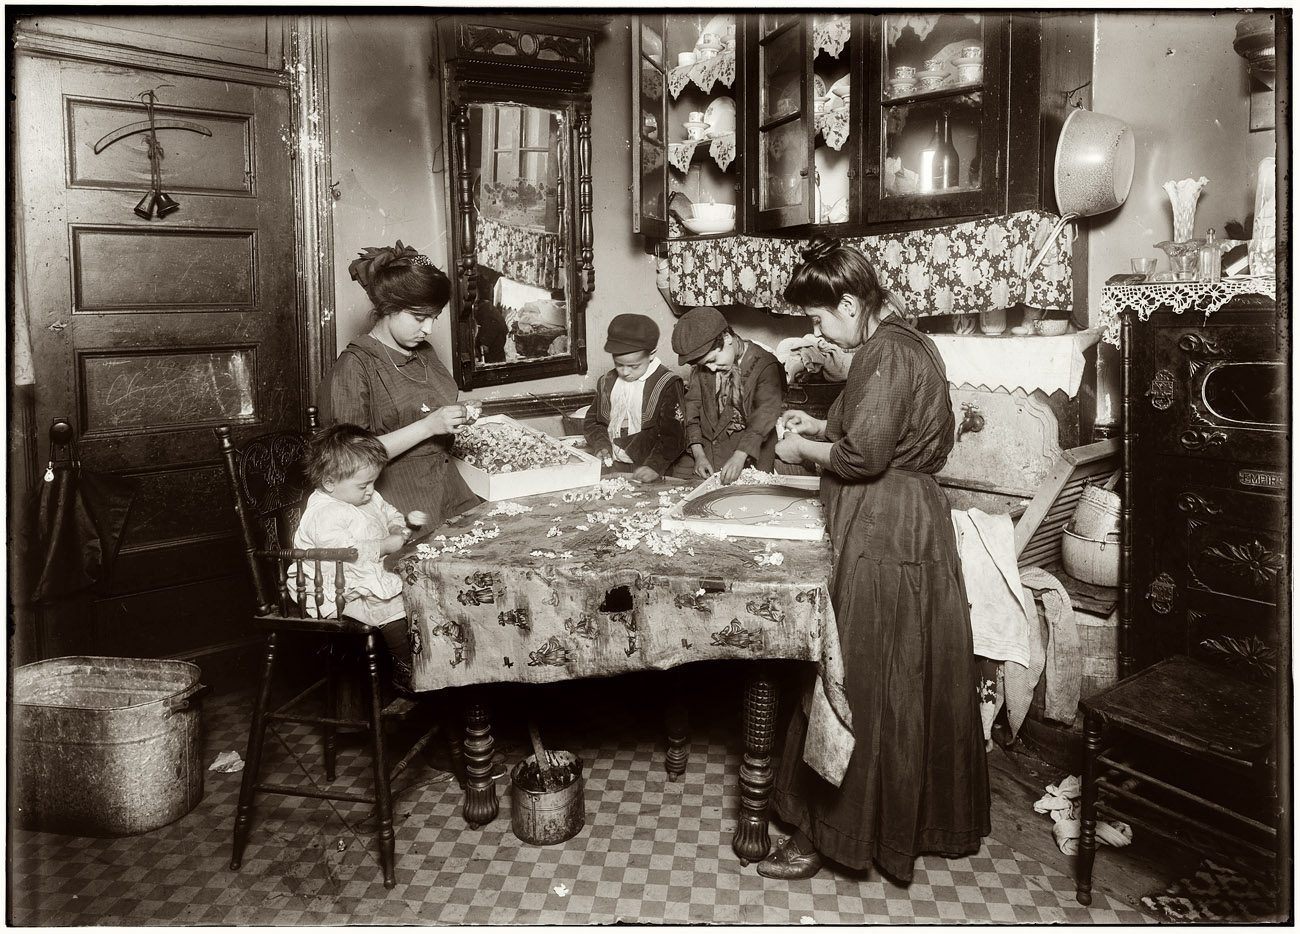 December 1911. Family of Mrs. Mette making flowers in a very dirty tenement, 302 Mott Street, top floor. Josephine, 13, helps outside school hours until 9 P.M. sometimes. She is soon to be 14 and expects to go to work in an embroidery factory. Says she worked in that factory all last summer. Nicholas, 6 years old and Johnnie, 8 yrs. The old work some. All together earn only 40 to 50 cents a day. Baby (20 months old) plays with the flowers, and they expect he can help a little before long. The father drives a coach (or hack) irregularly. View full size. Photo and caption by Lewis Wickes Hine.